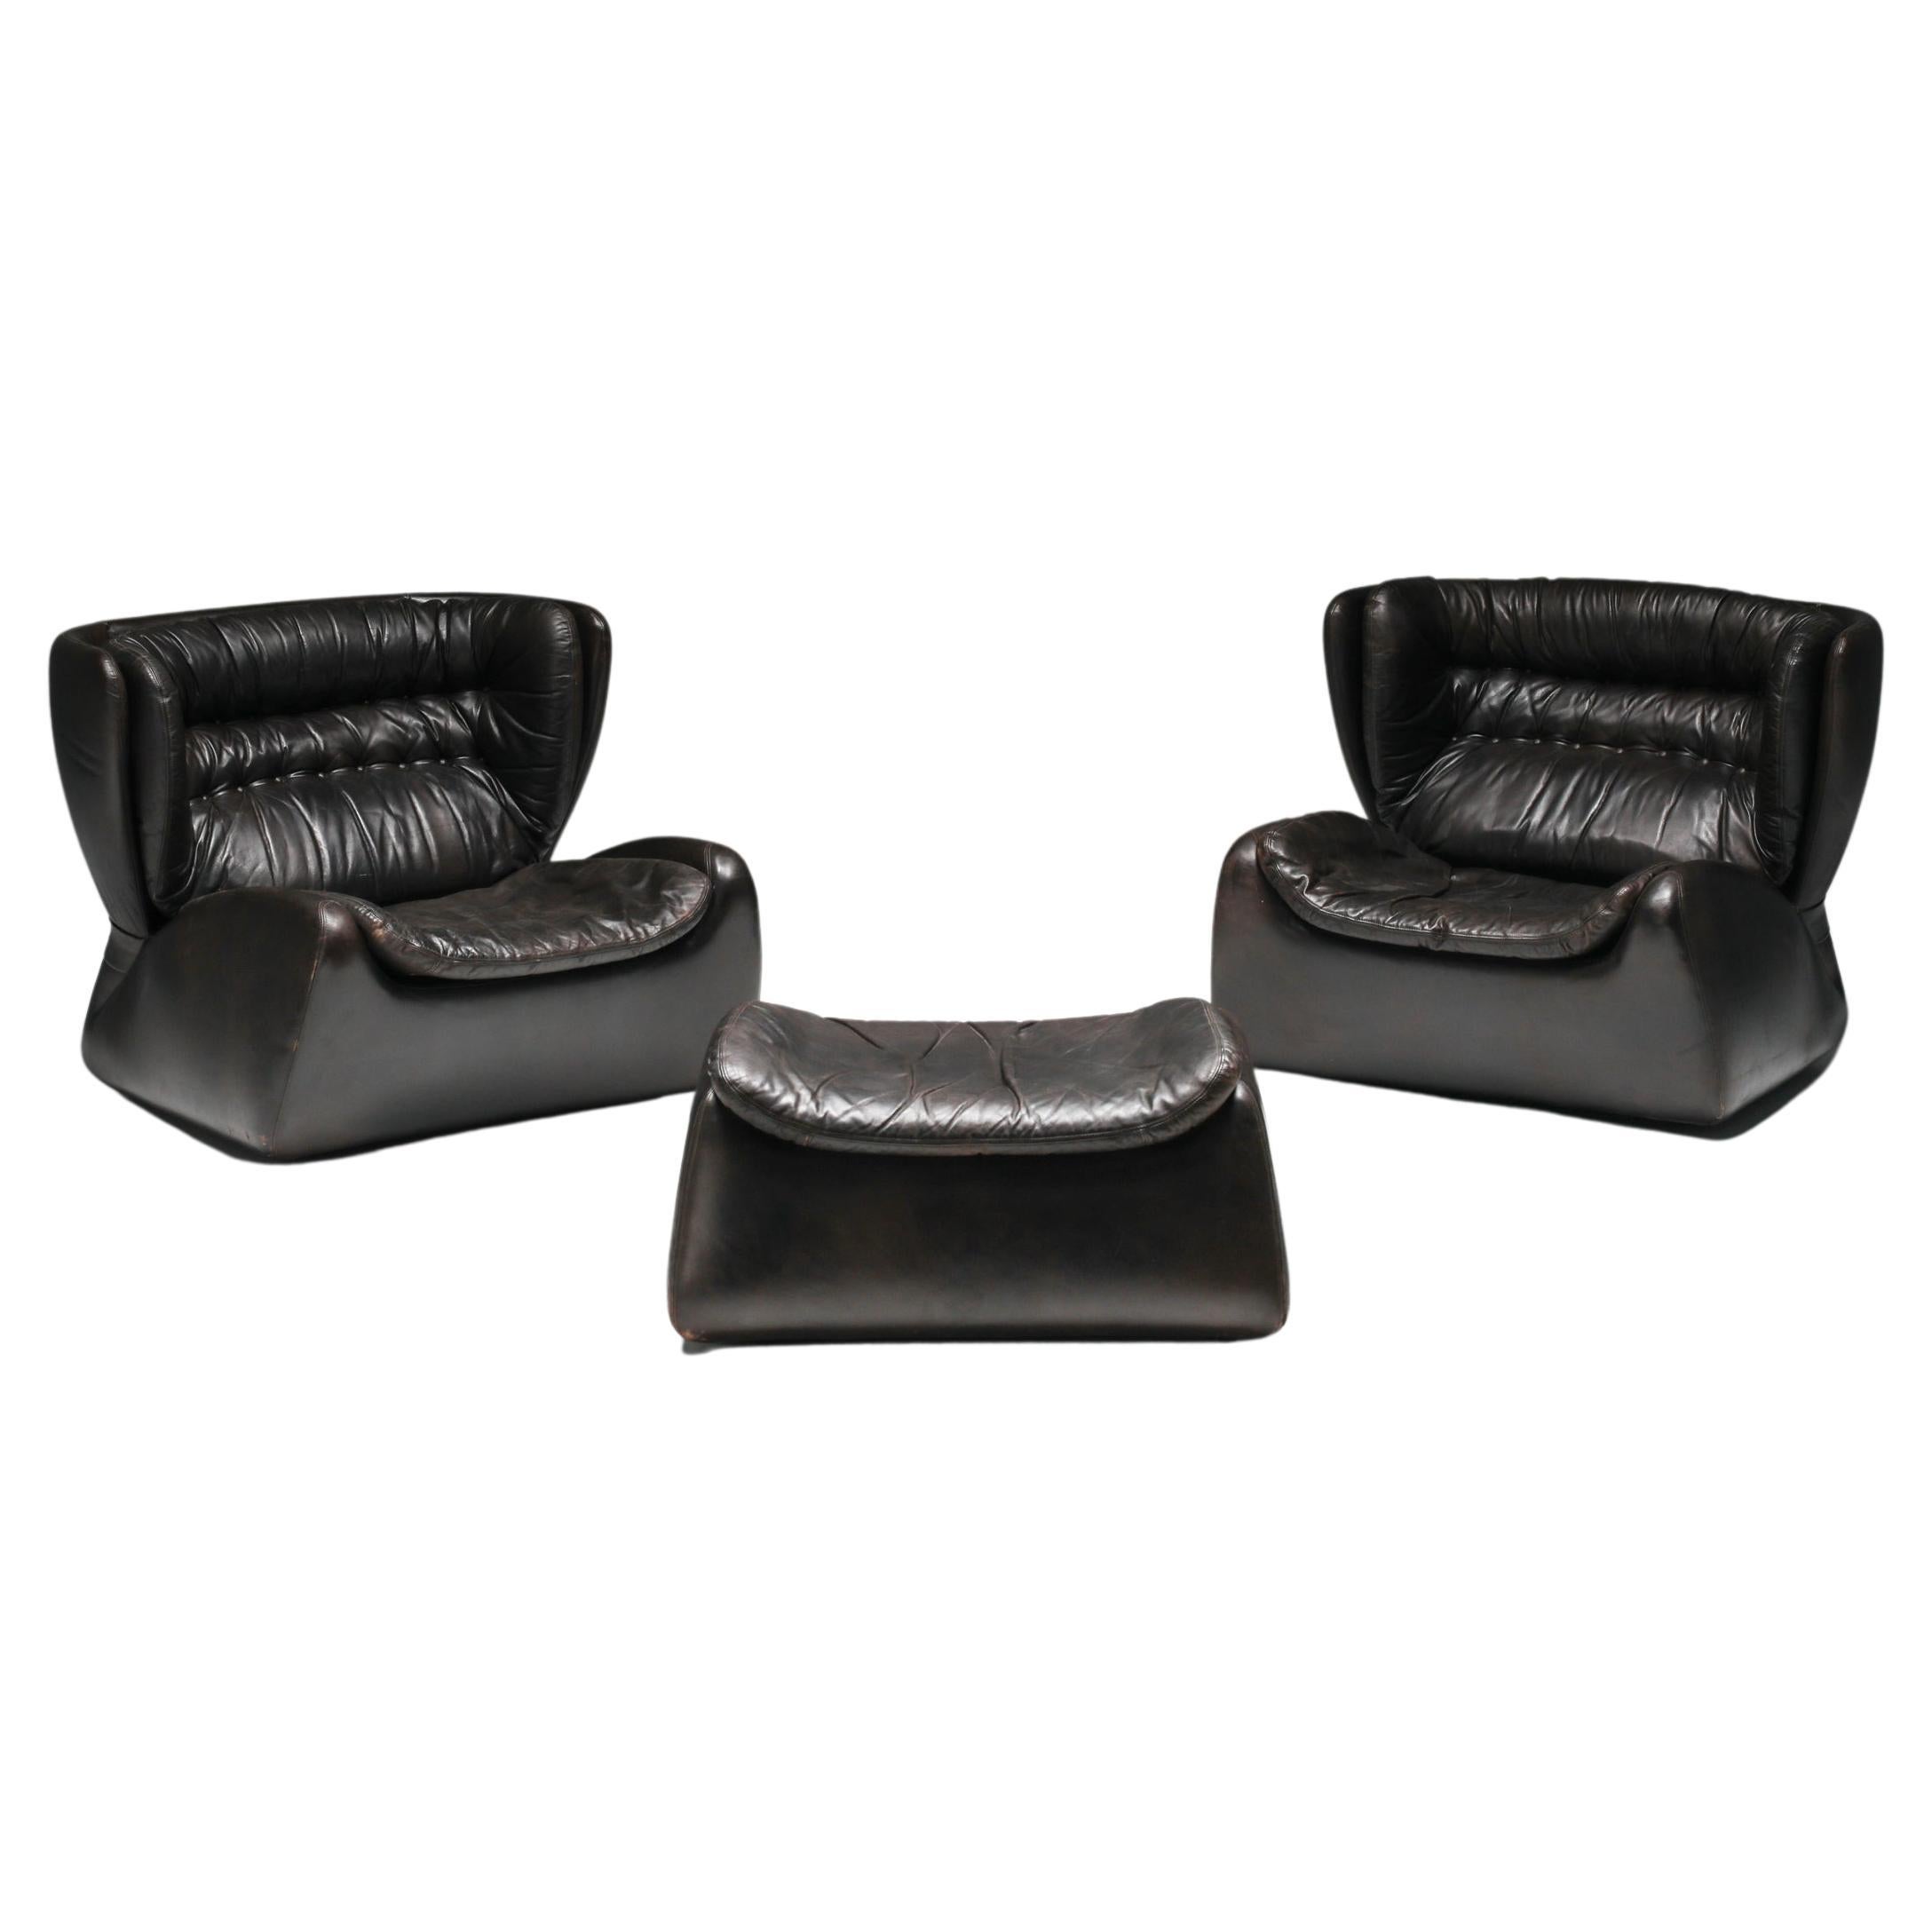 Belgian Design, Dark Brown 'Pasha' Lounge Chairs by Durlet, 1970's For Sale